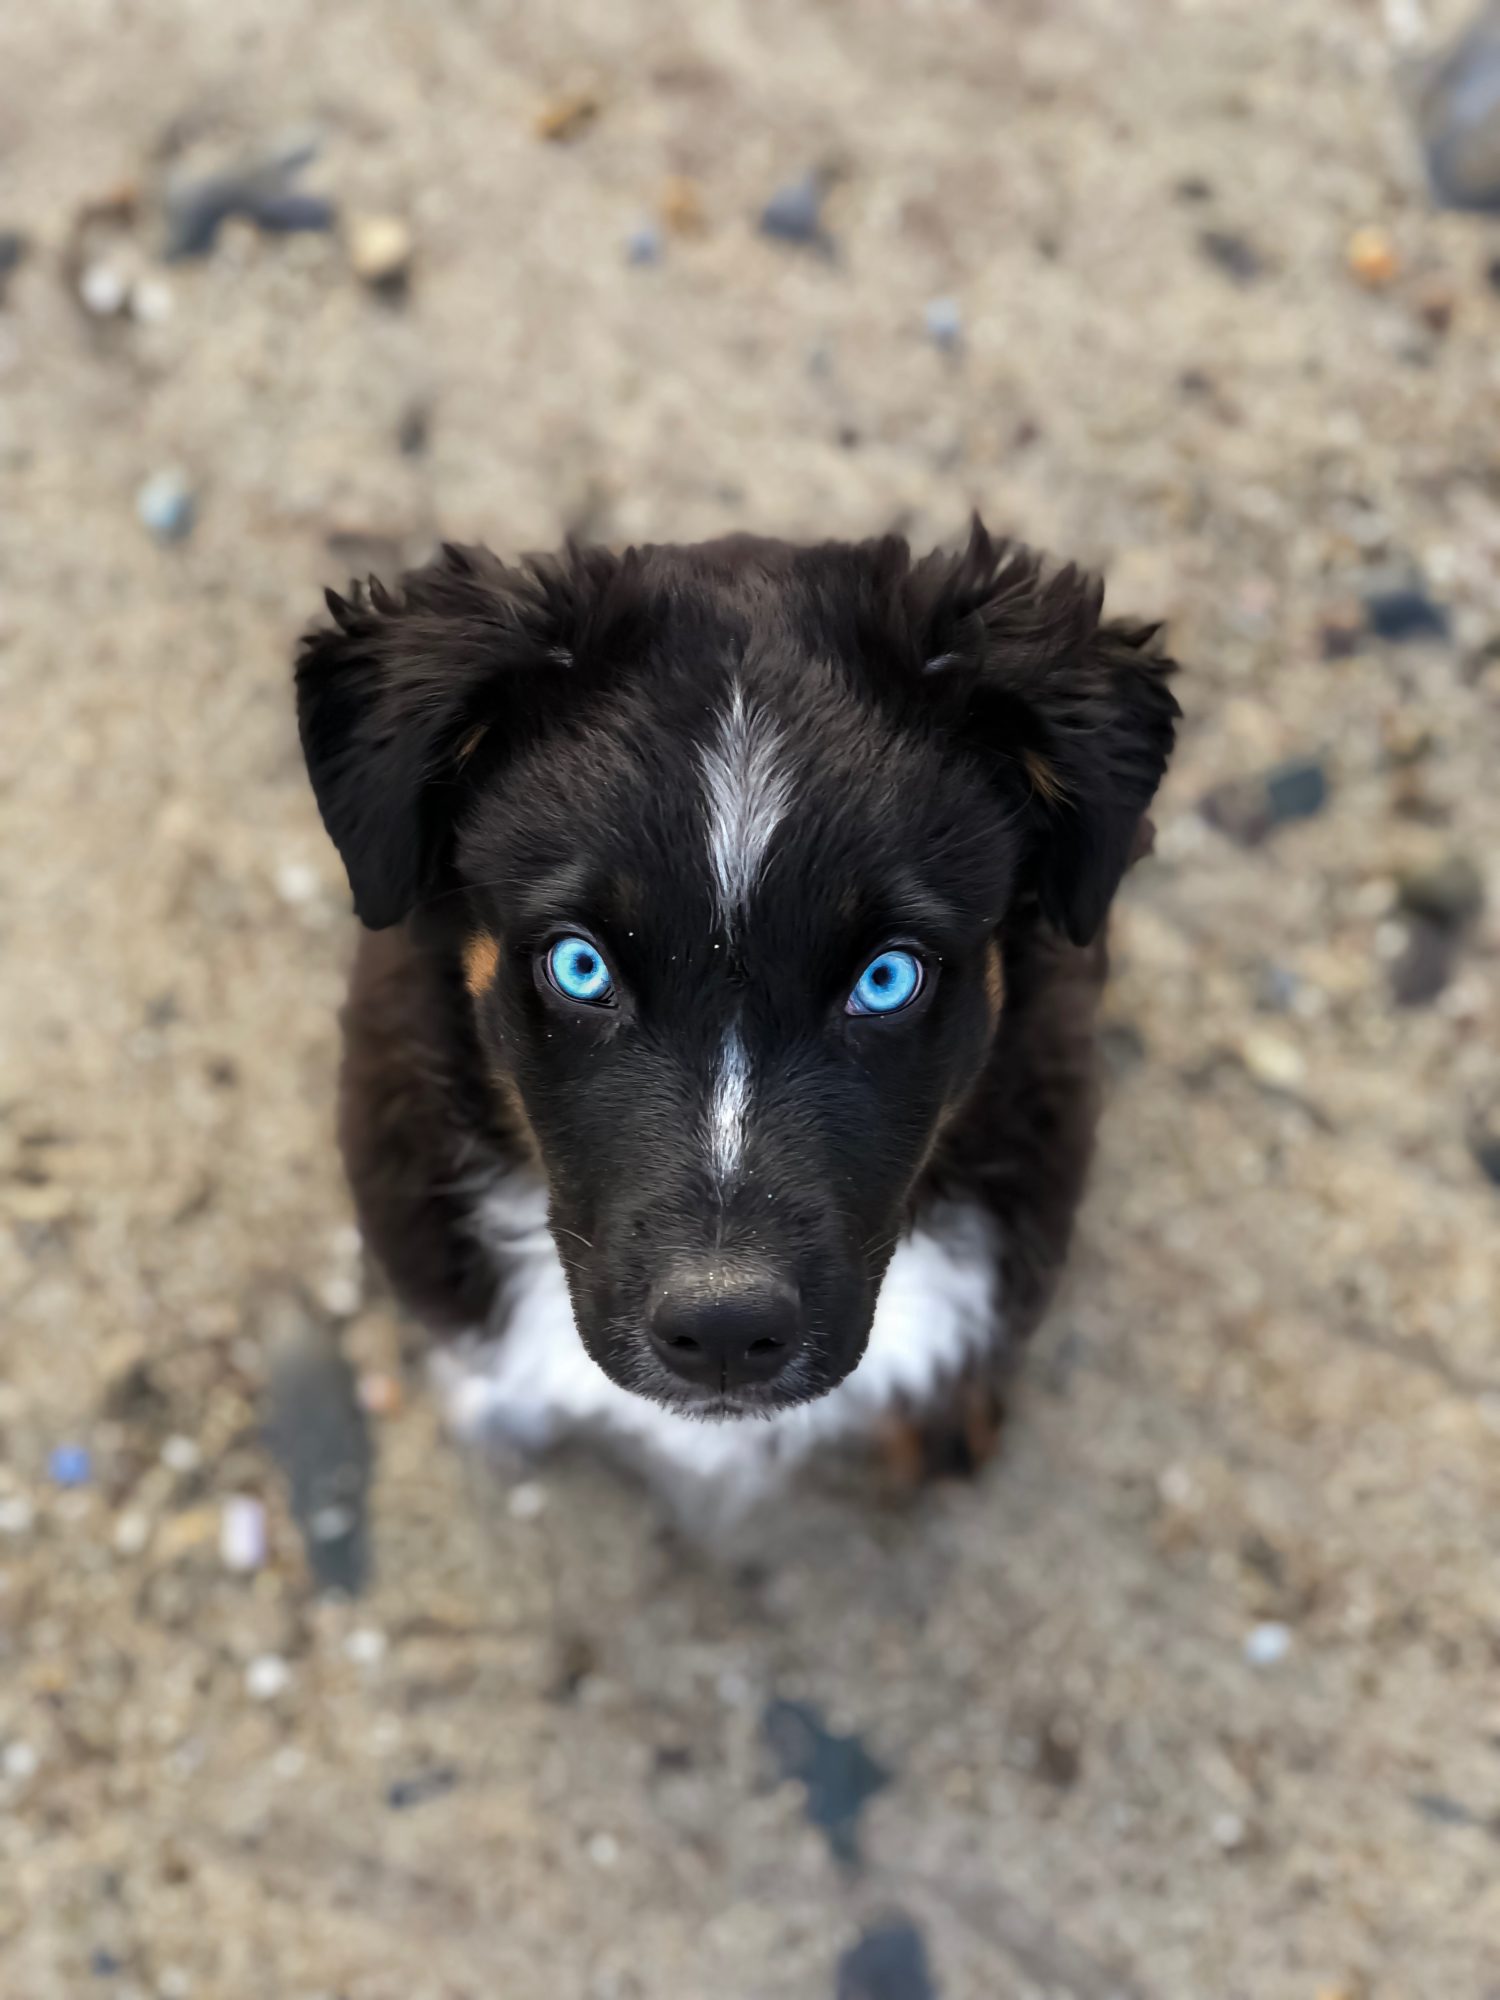 How To Level Up Your Pet Photos | Pet Photography Tips by popular New England photographer, Shannon Shipman: image of a puppy with blue eyes.